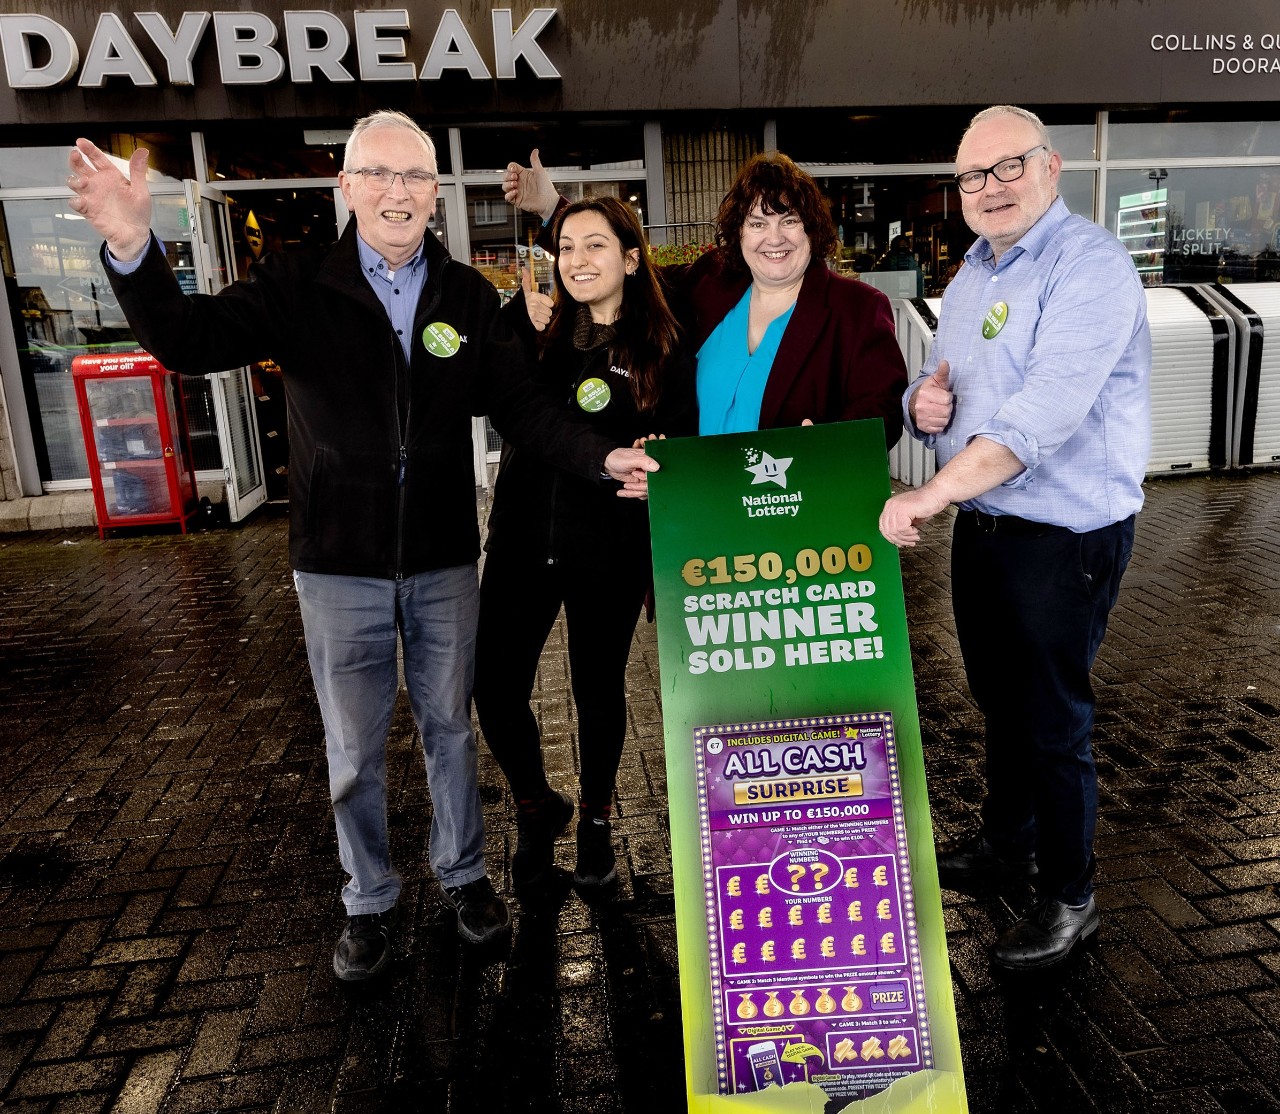 NO REPRO FEE. The National Lottery, All Cash Surprise Winner sold in The Ambassador, Shop, Dooradoyle, Limerick. Pictured celebrating the news are from left: Tom Kinnane, Manager, Emel Akcetin, Mary Grace, Area Manager, National Lottery and Pat Quinlan, Ambassador Shop owner. Picture: Keith Wiseman / Mac Innes Photography